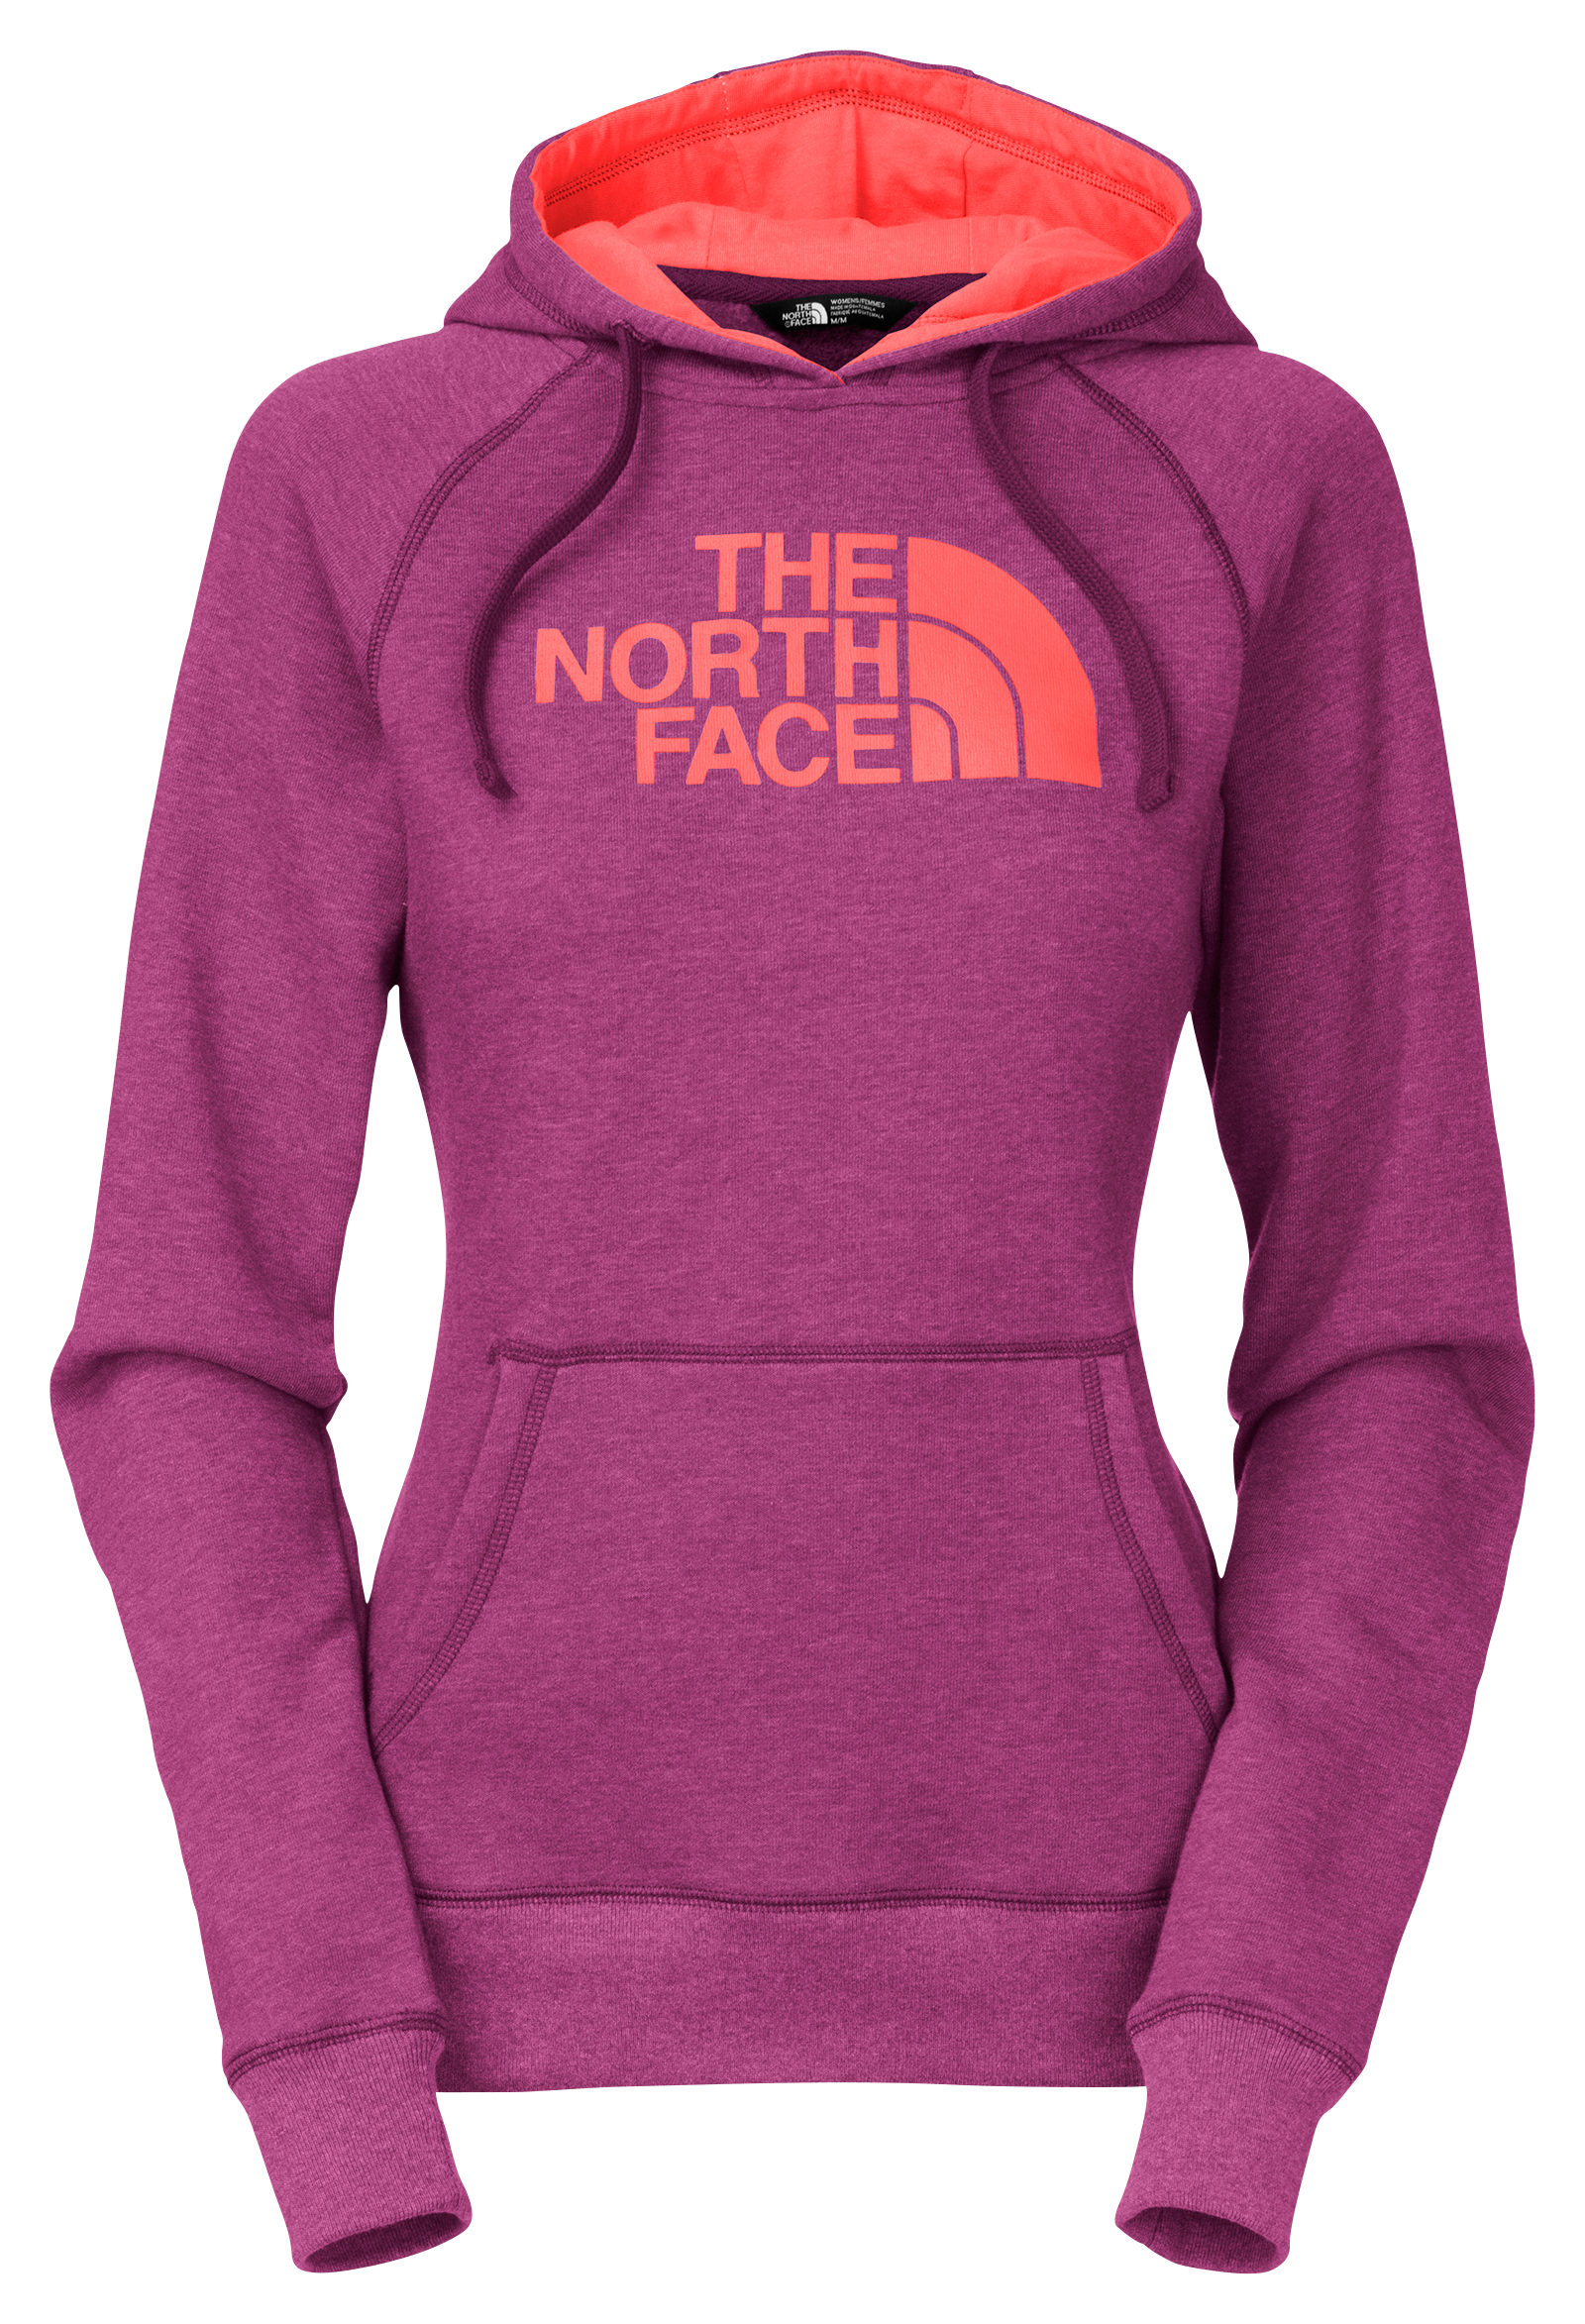 The North Face Half Dome Long-Sleeve Hoodie for Ladies | Bass Pro Shops